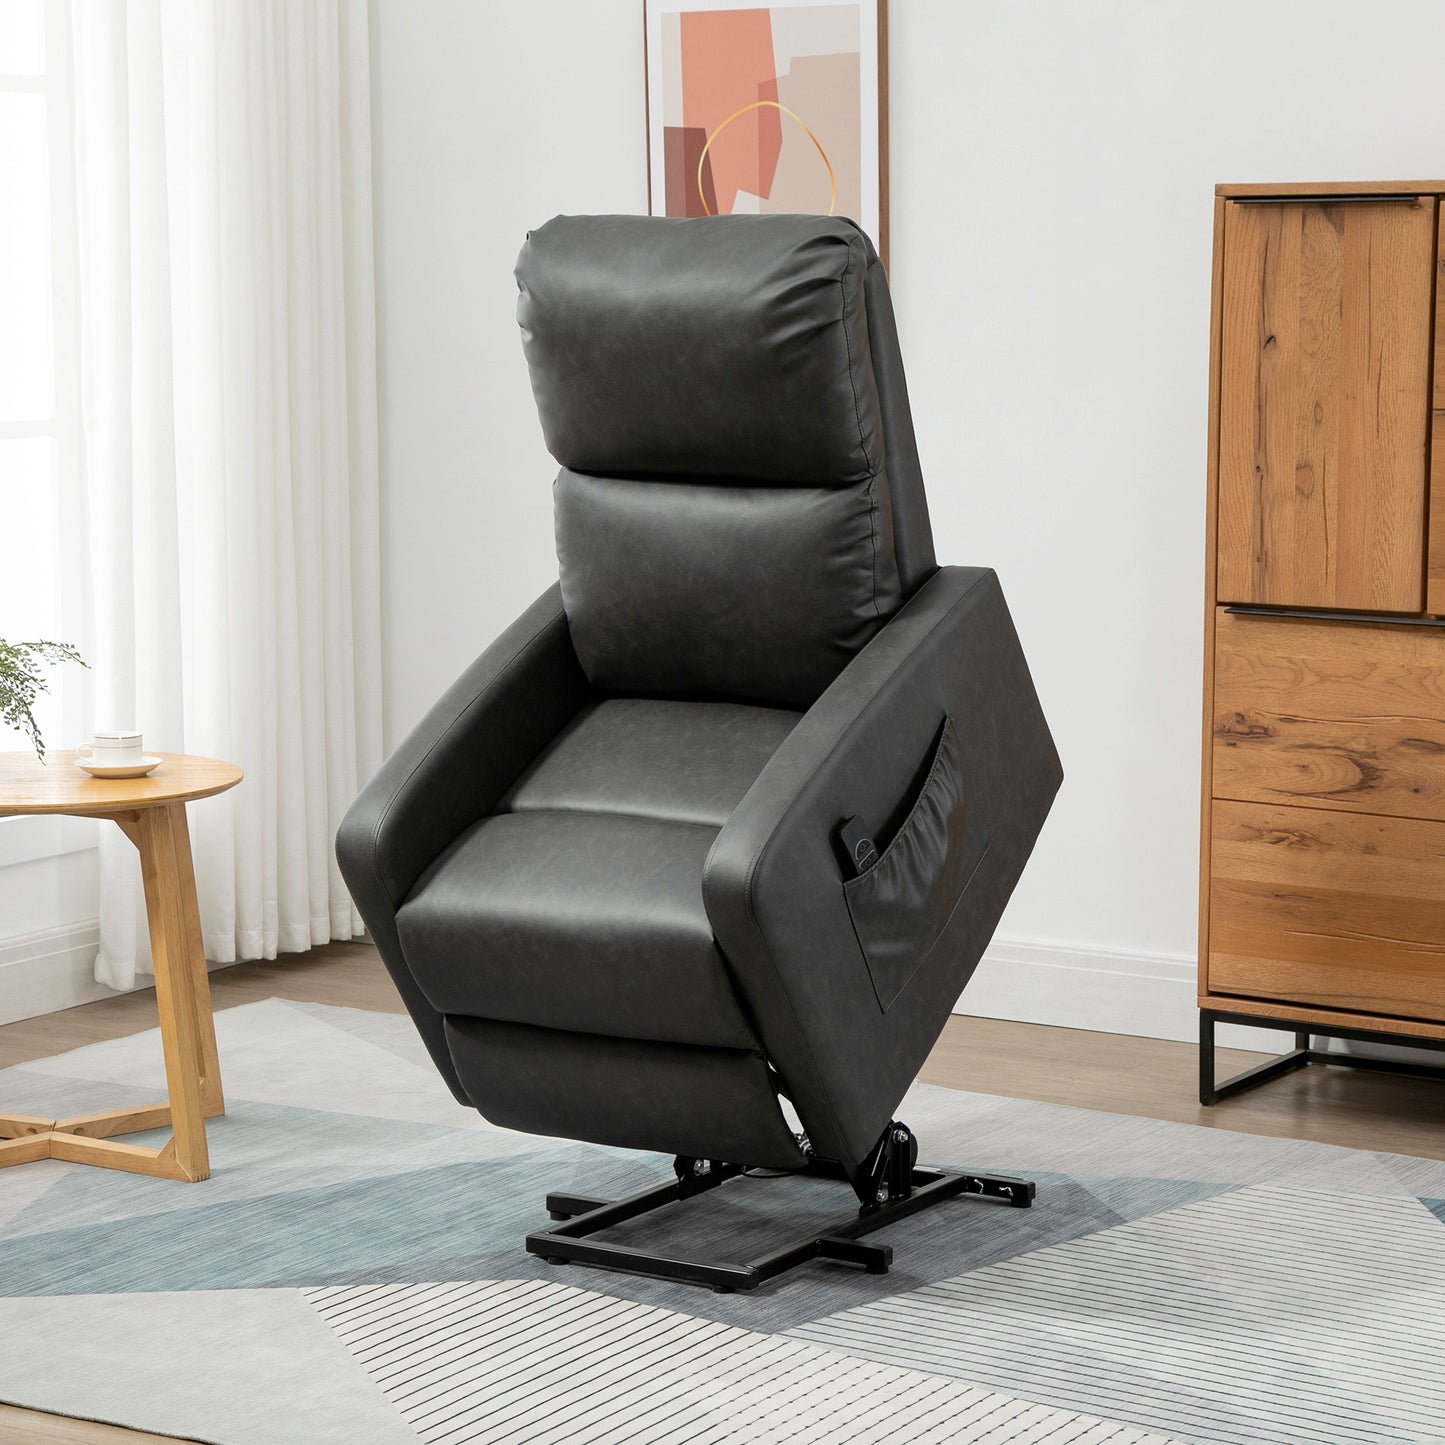 HOMCOM Power Lift Brown Leather Recliner Chair with Remote Control